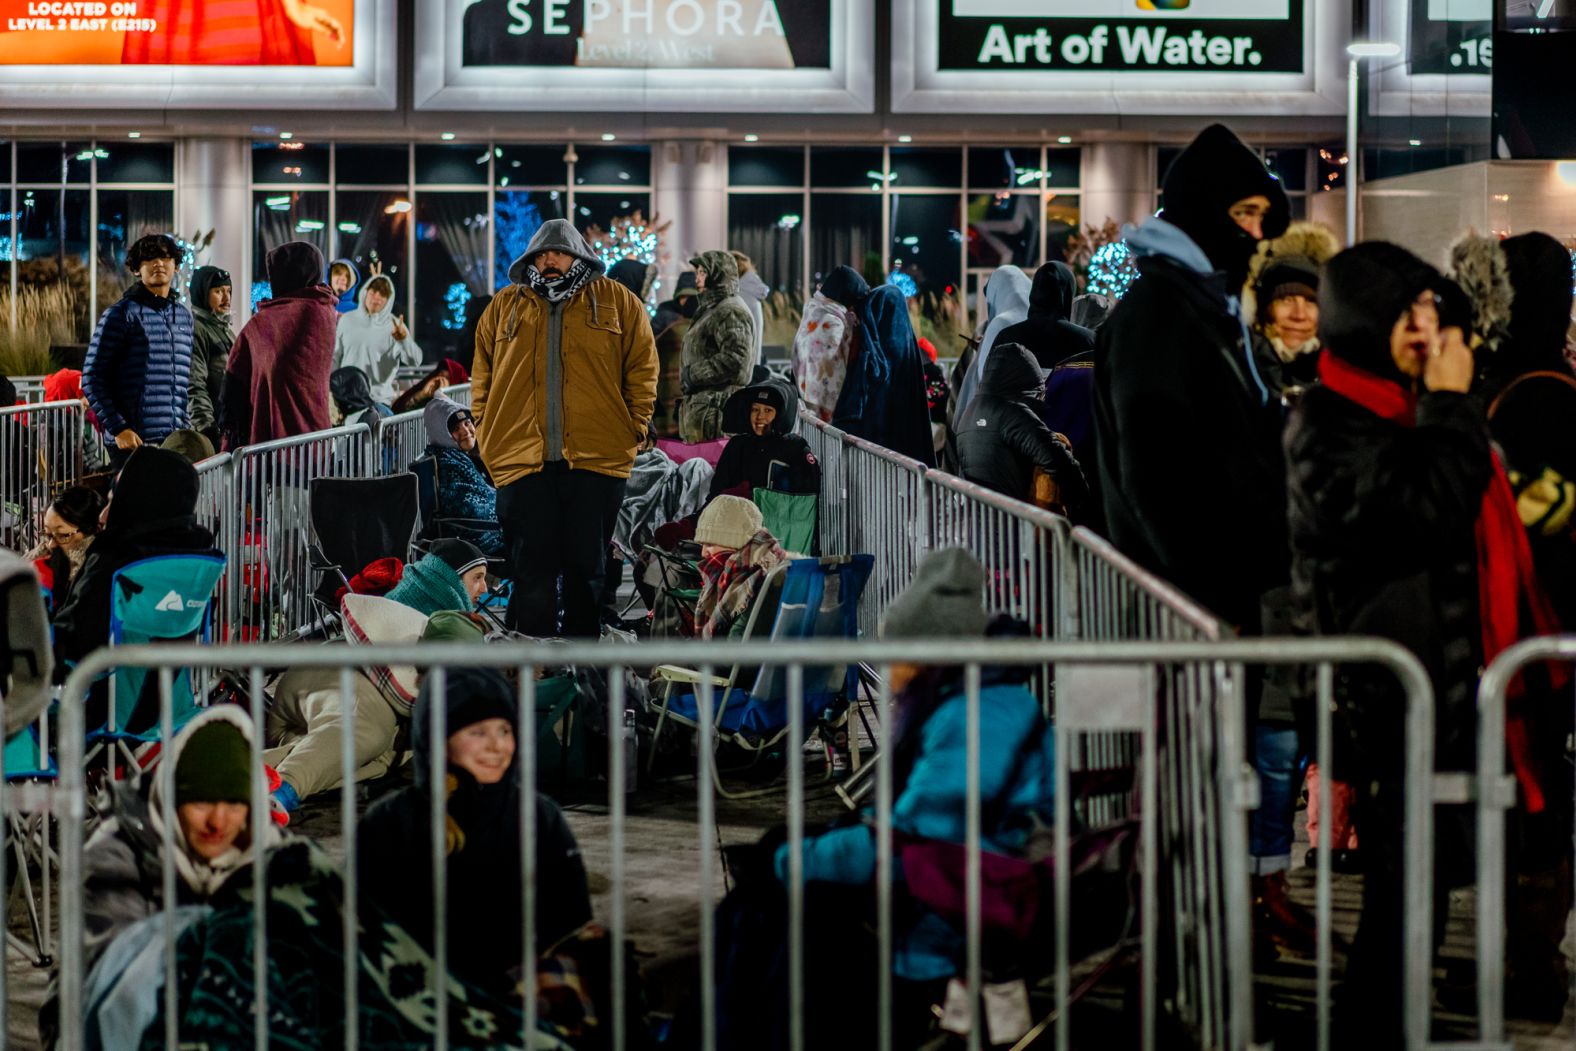 Hundreds of people line up for Black Friday outside the Mall of America in Bloomington. At 5.6 million square feet, it's <a href="https://www.cnn.com/2022/11/25/economy/black-friday-mall-of-america/index.html" target="_blank">the nation's largest shopping and entertainment center</a>.